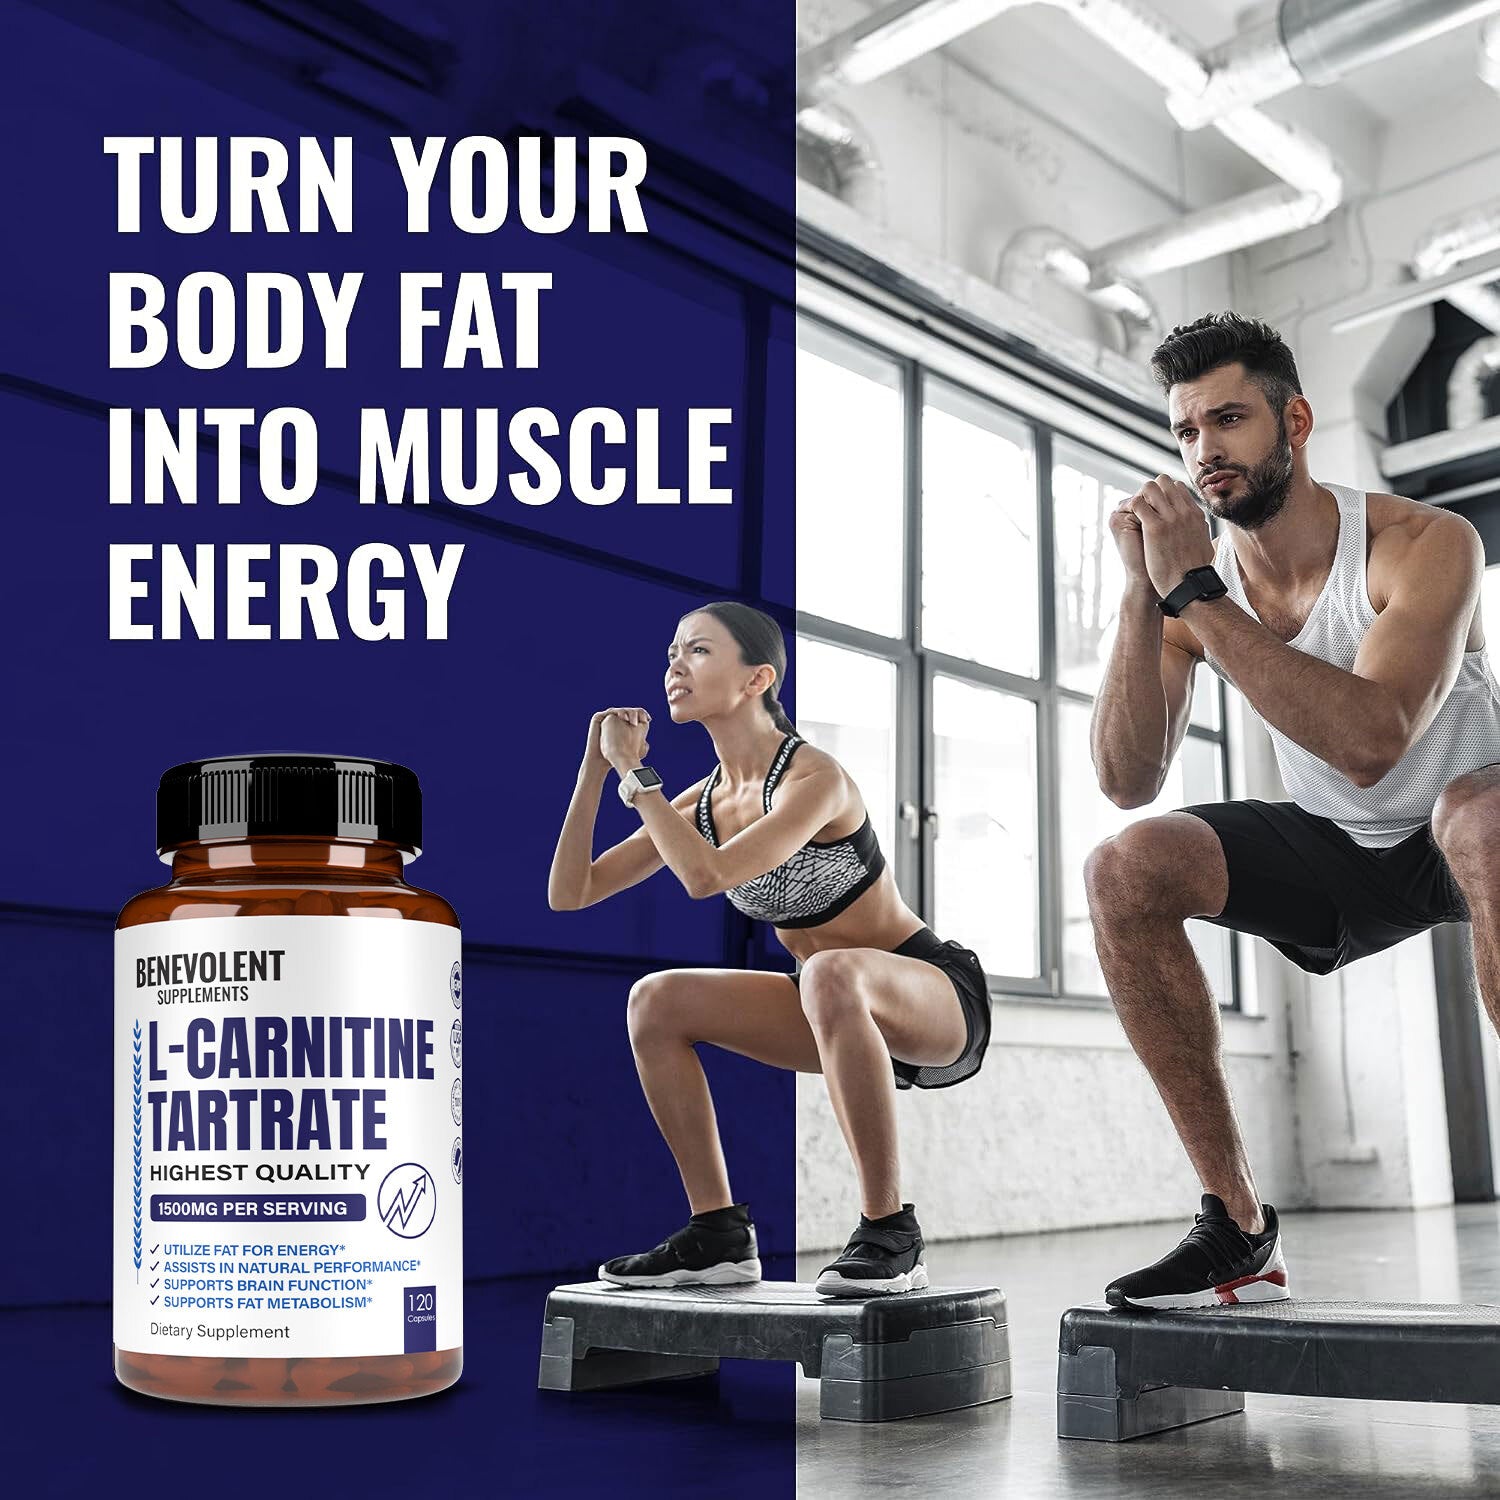 Turn your body fat into muscle energy